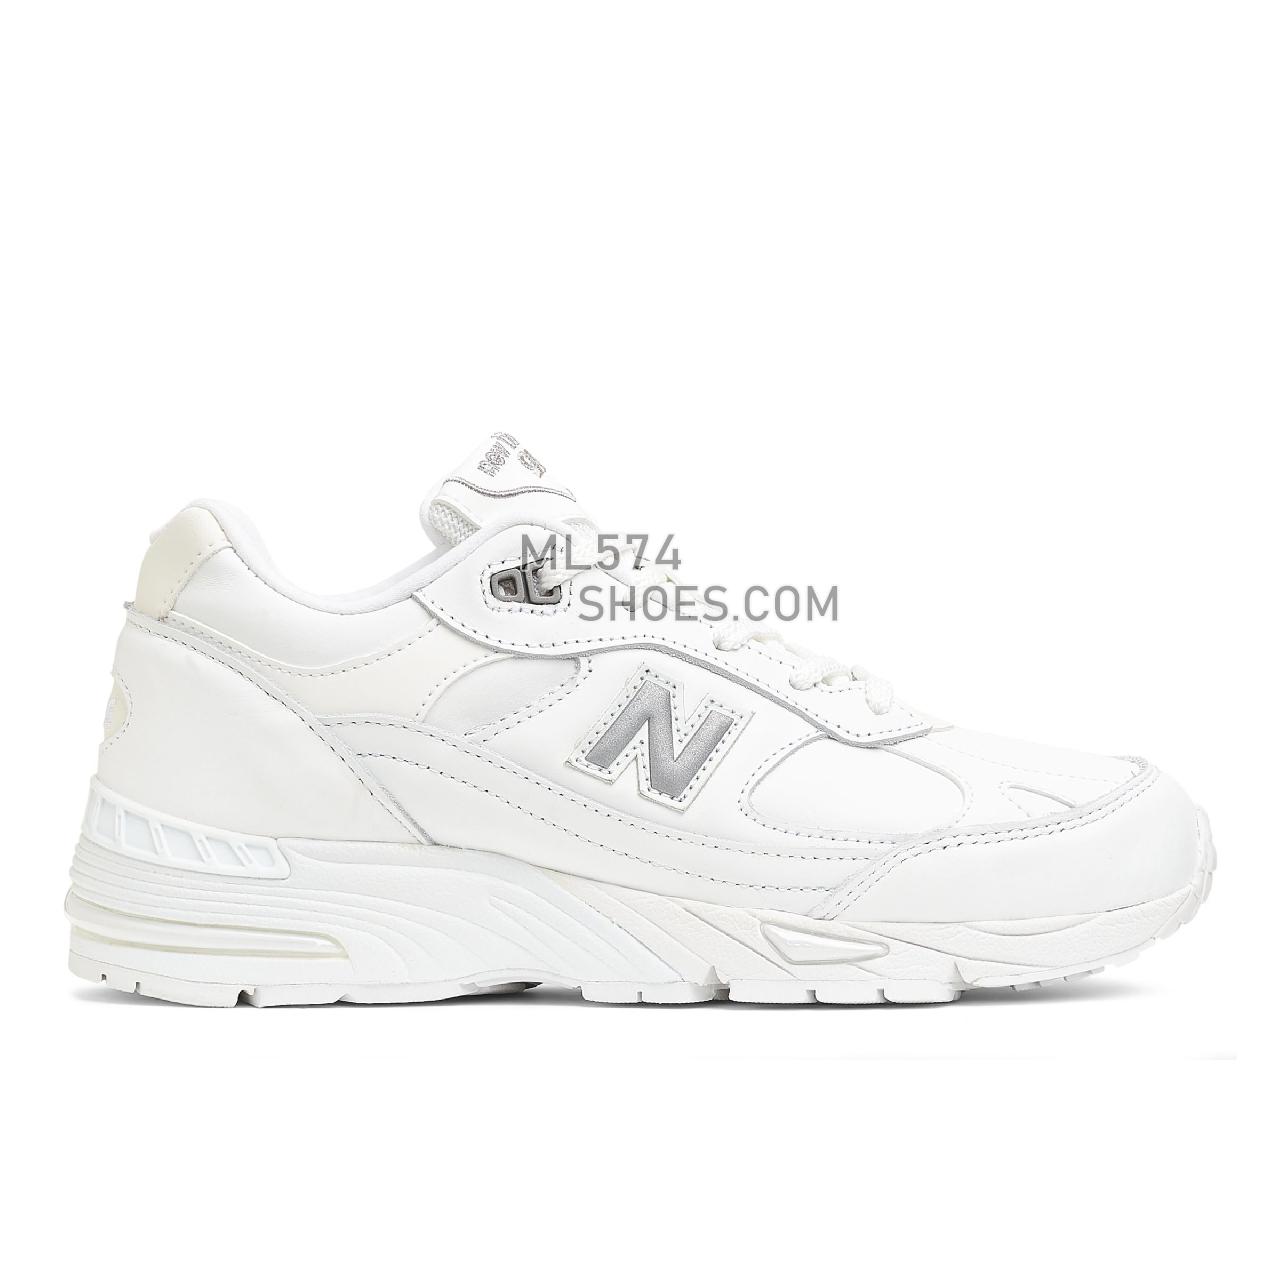 New Balance Made in UK 991 - Women's Made in USA And UK Sneakers - White with Grey - W991TW